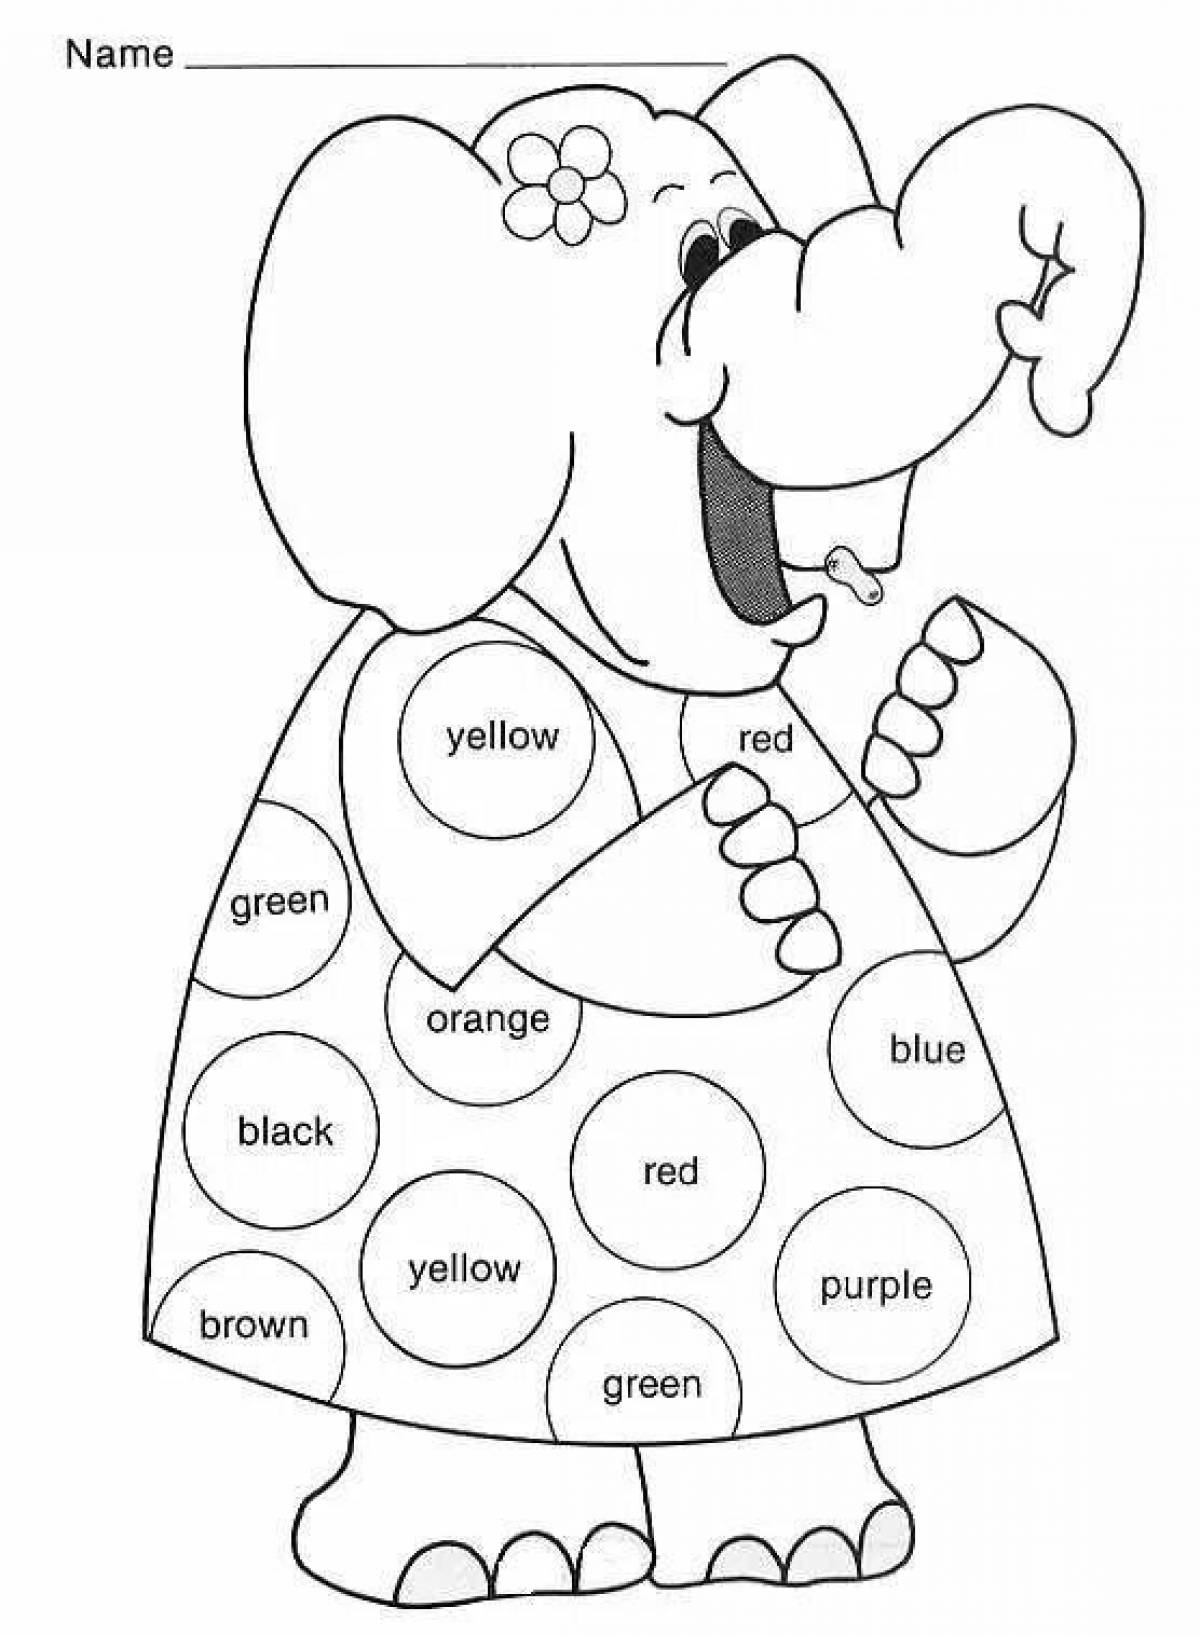 Colorful English coloring book layout